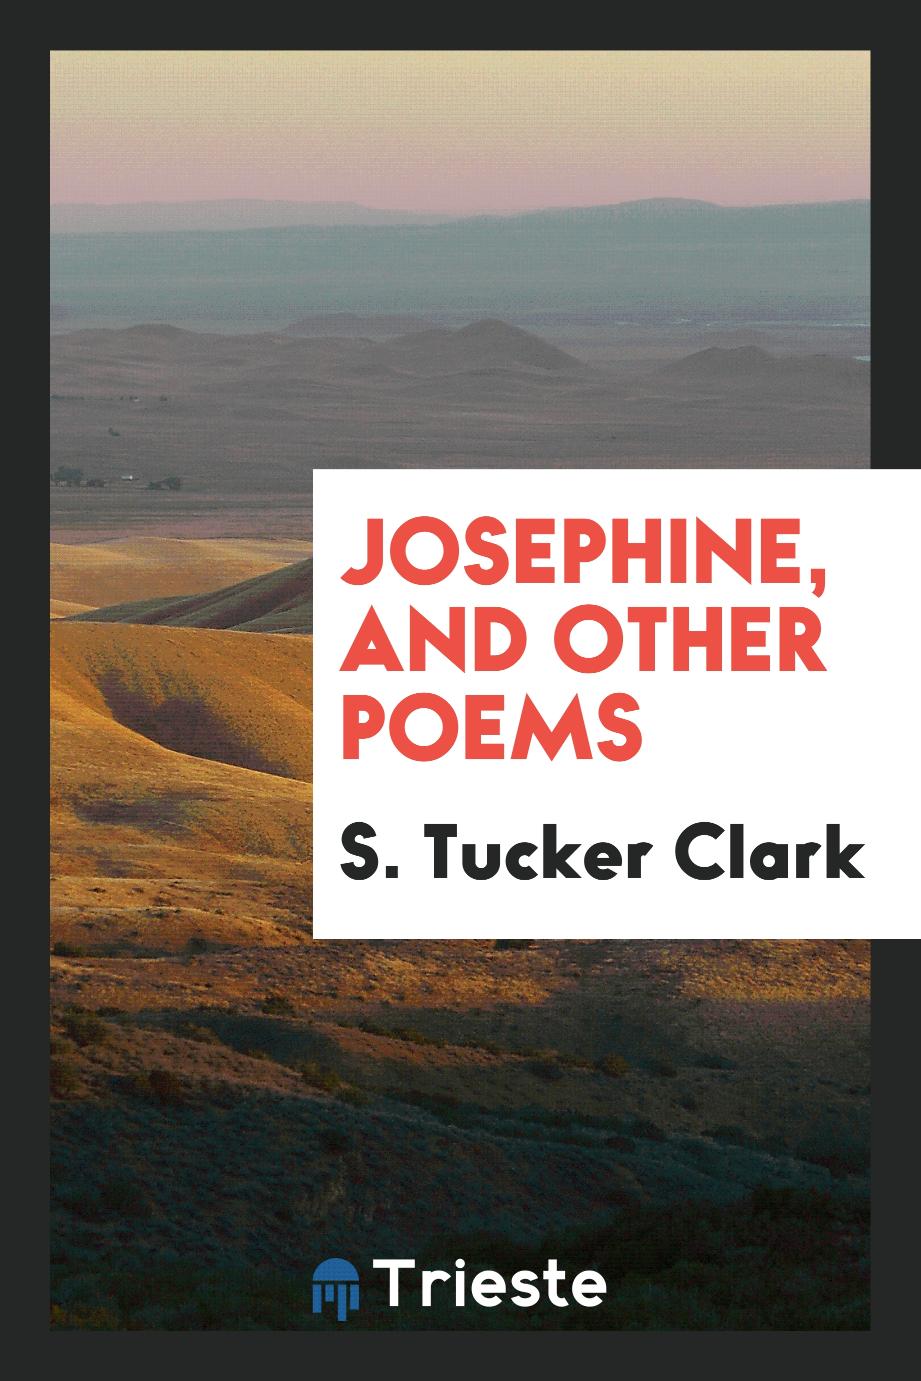 Josephine, and other poems